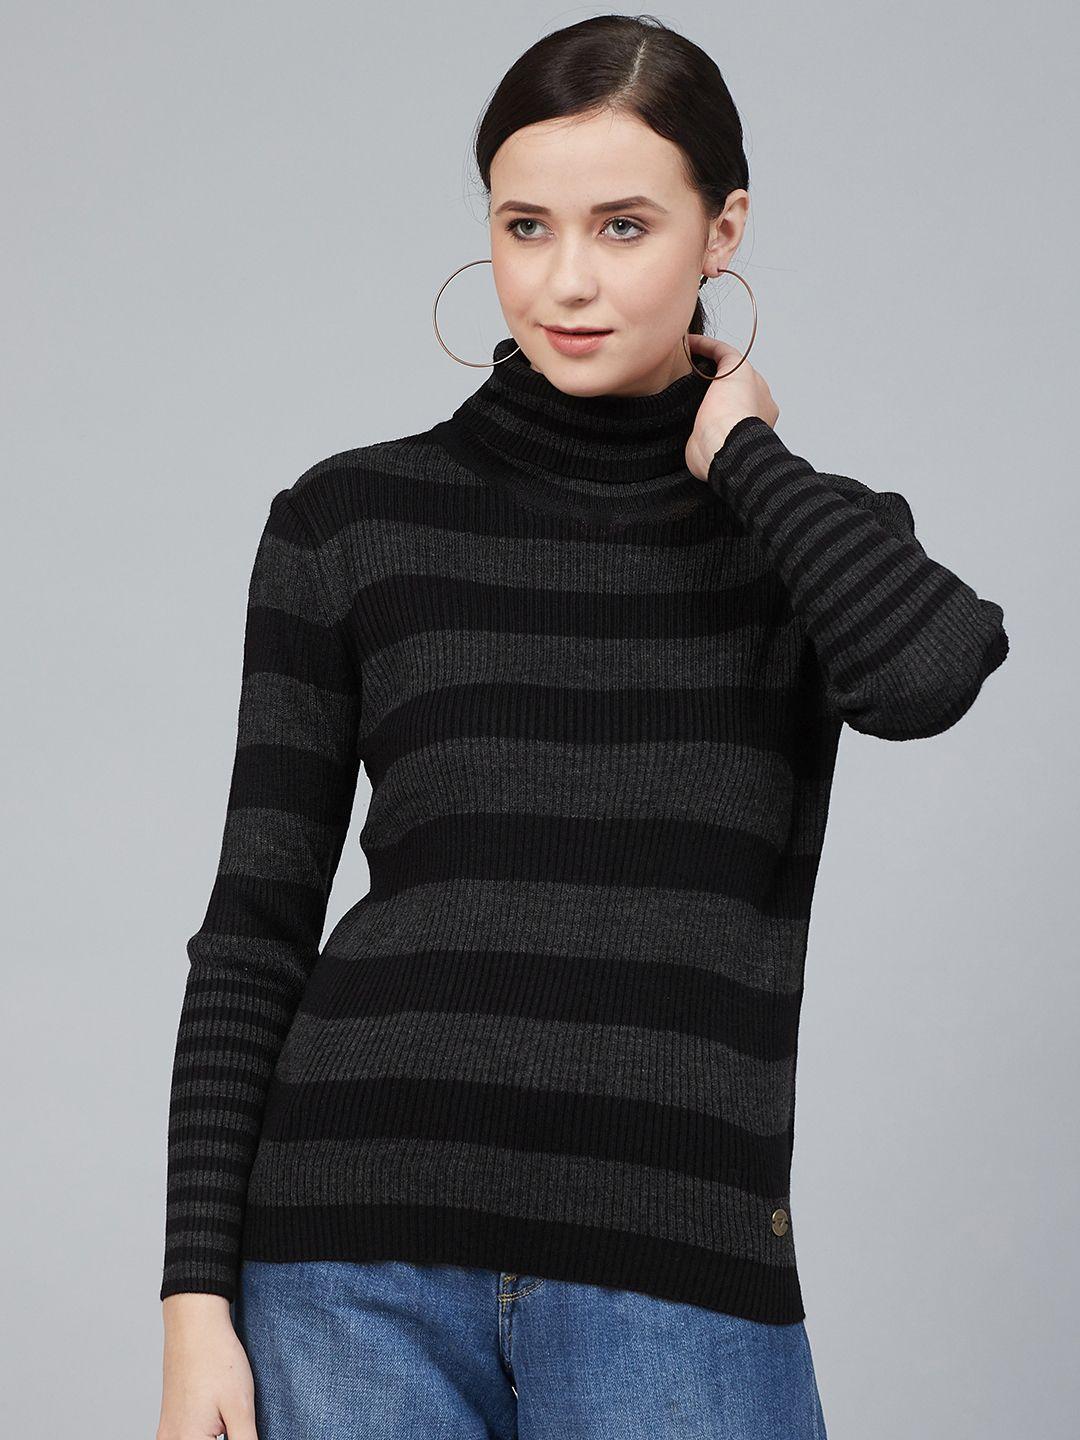 cayman women charcoal grey & black striped pullover sweater